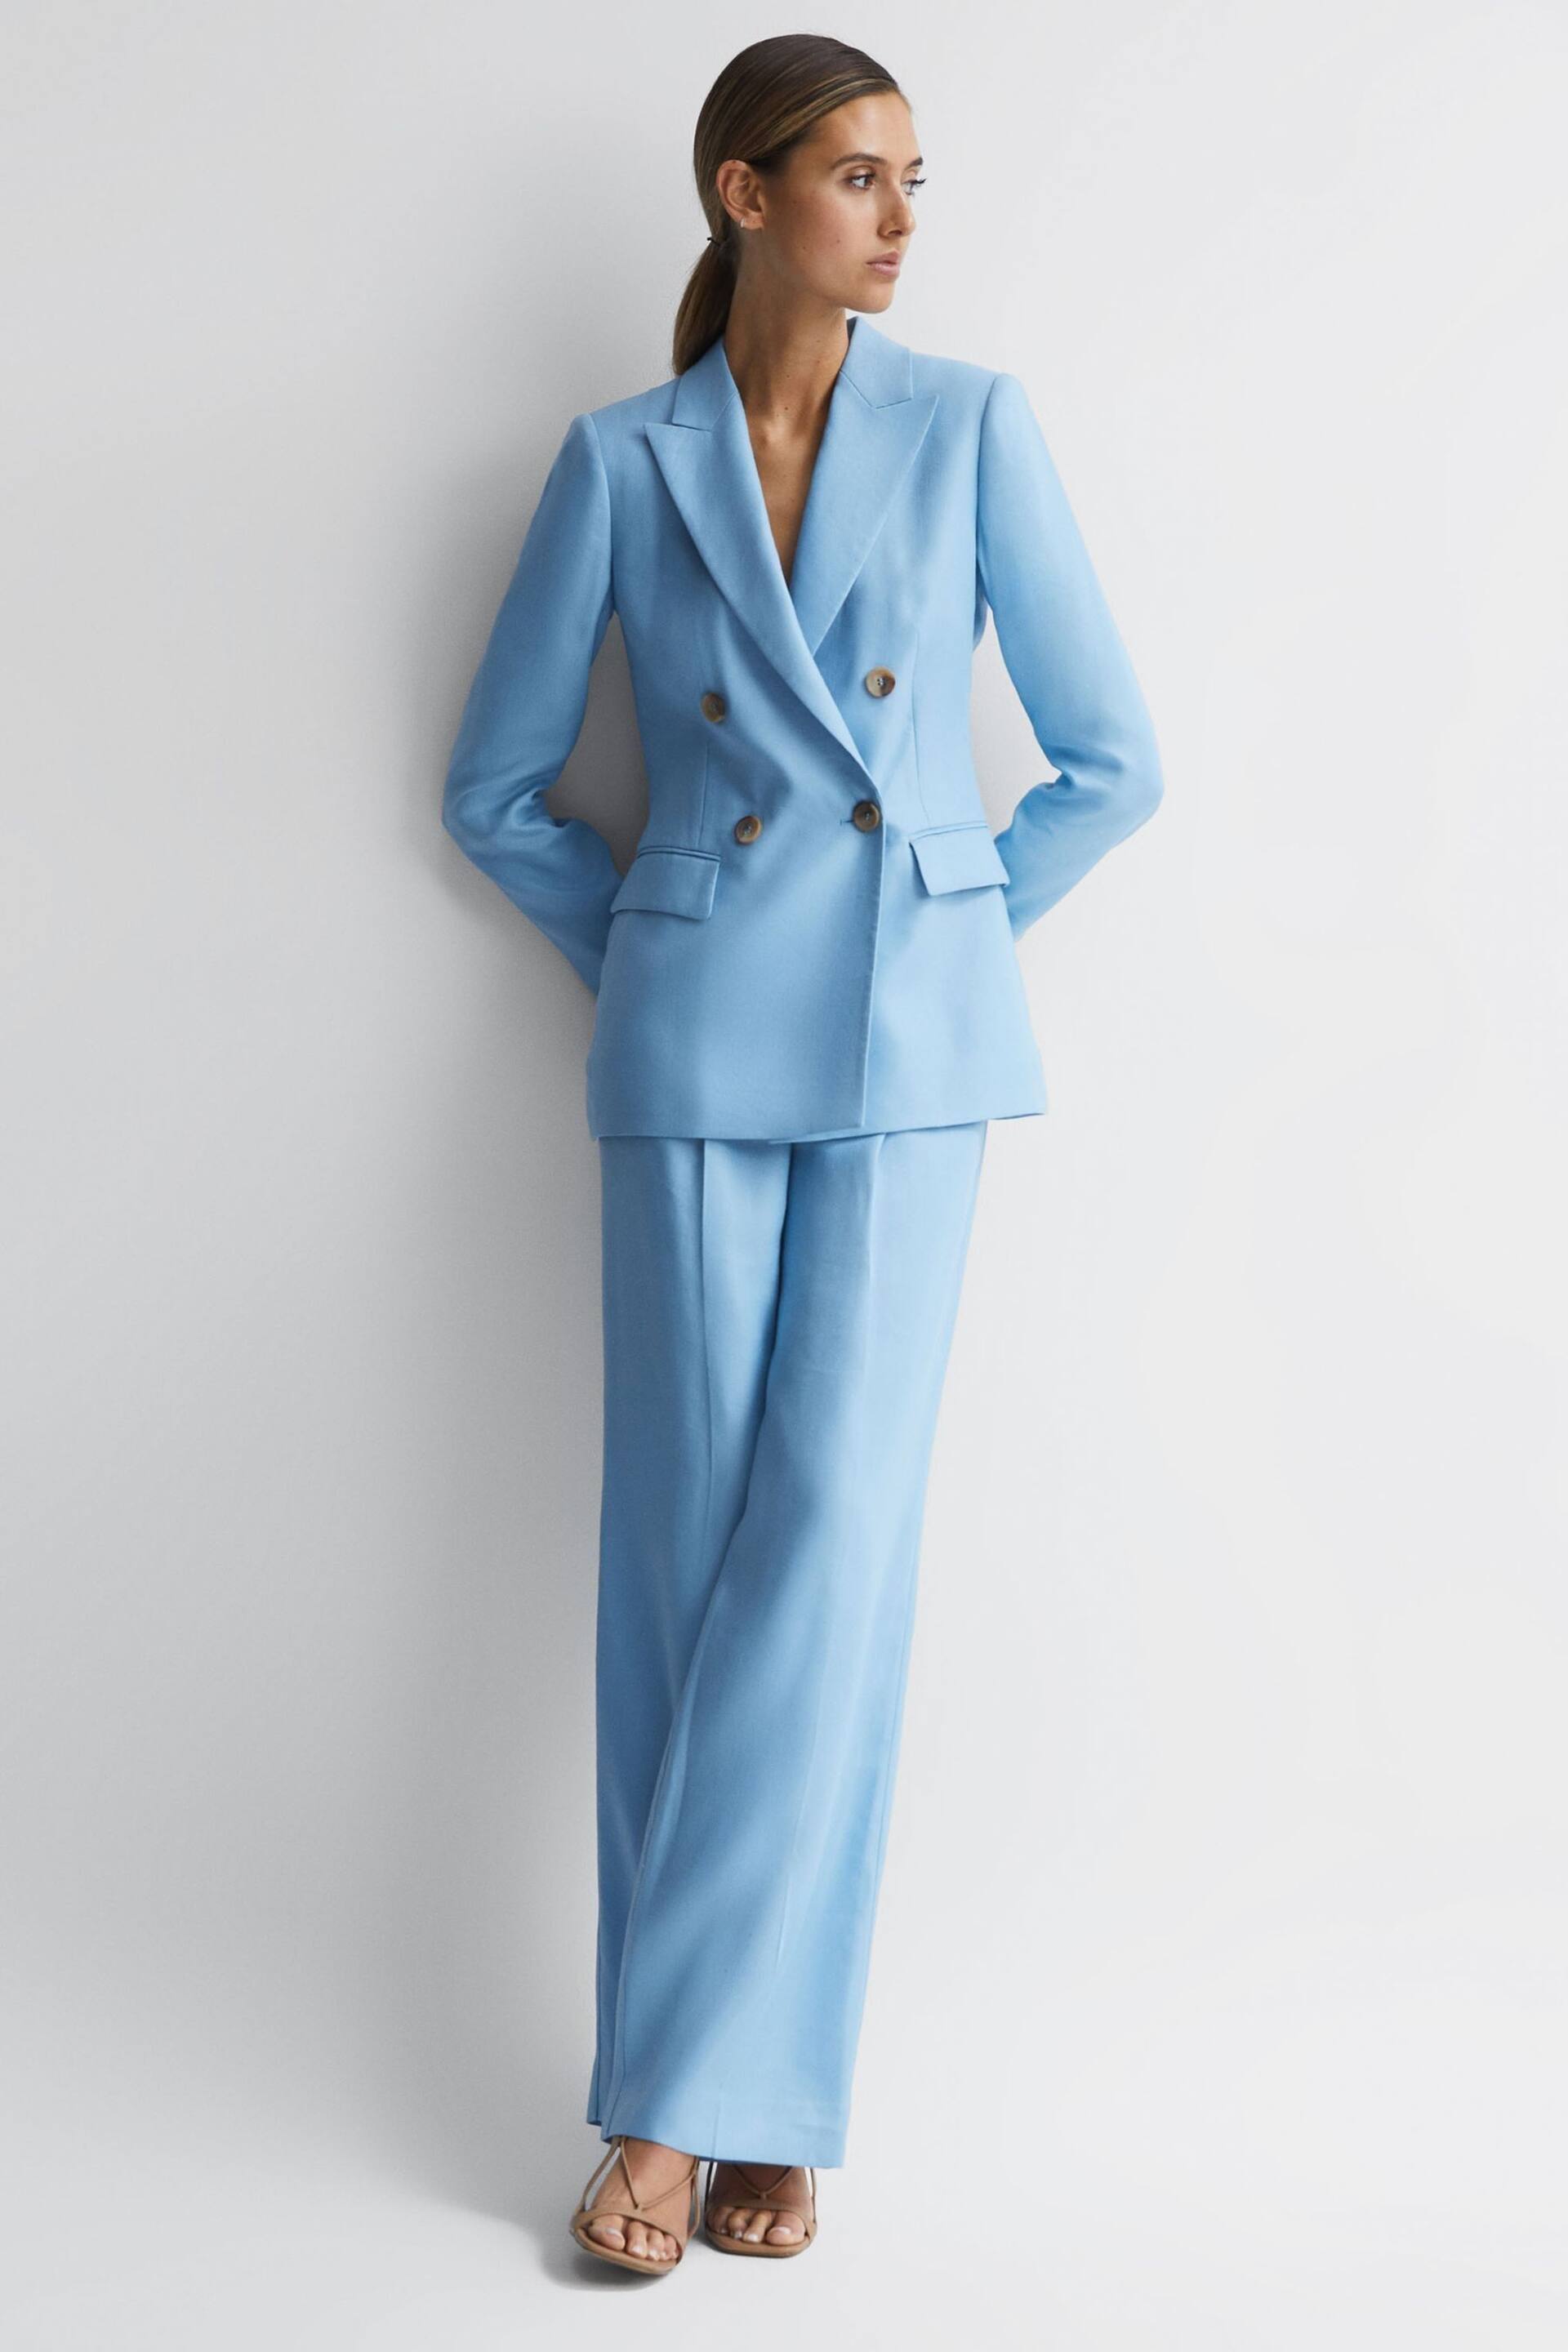 Reiss Blue Hollie Double Breasted Linen Blazer - Image 1 of 7